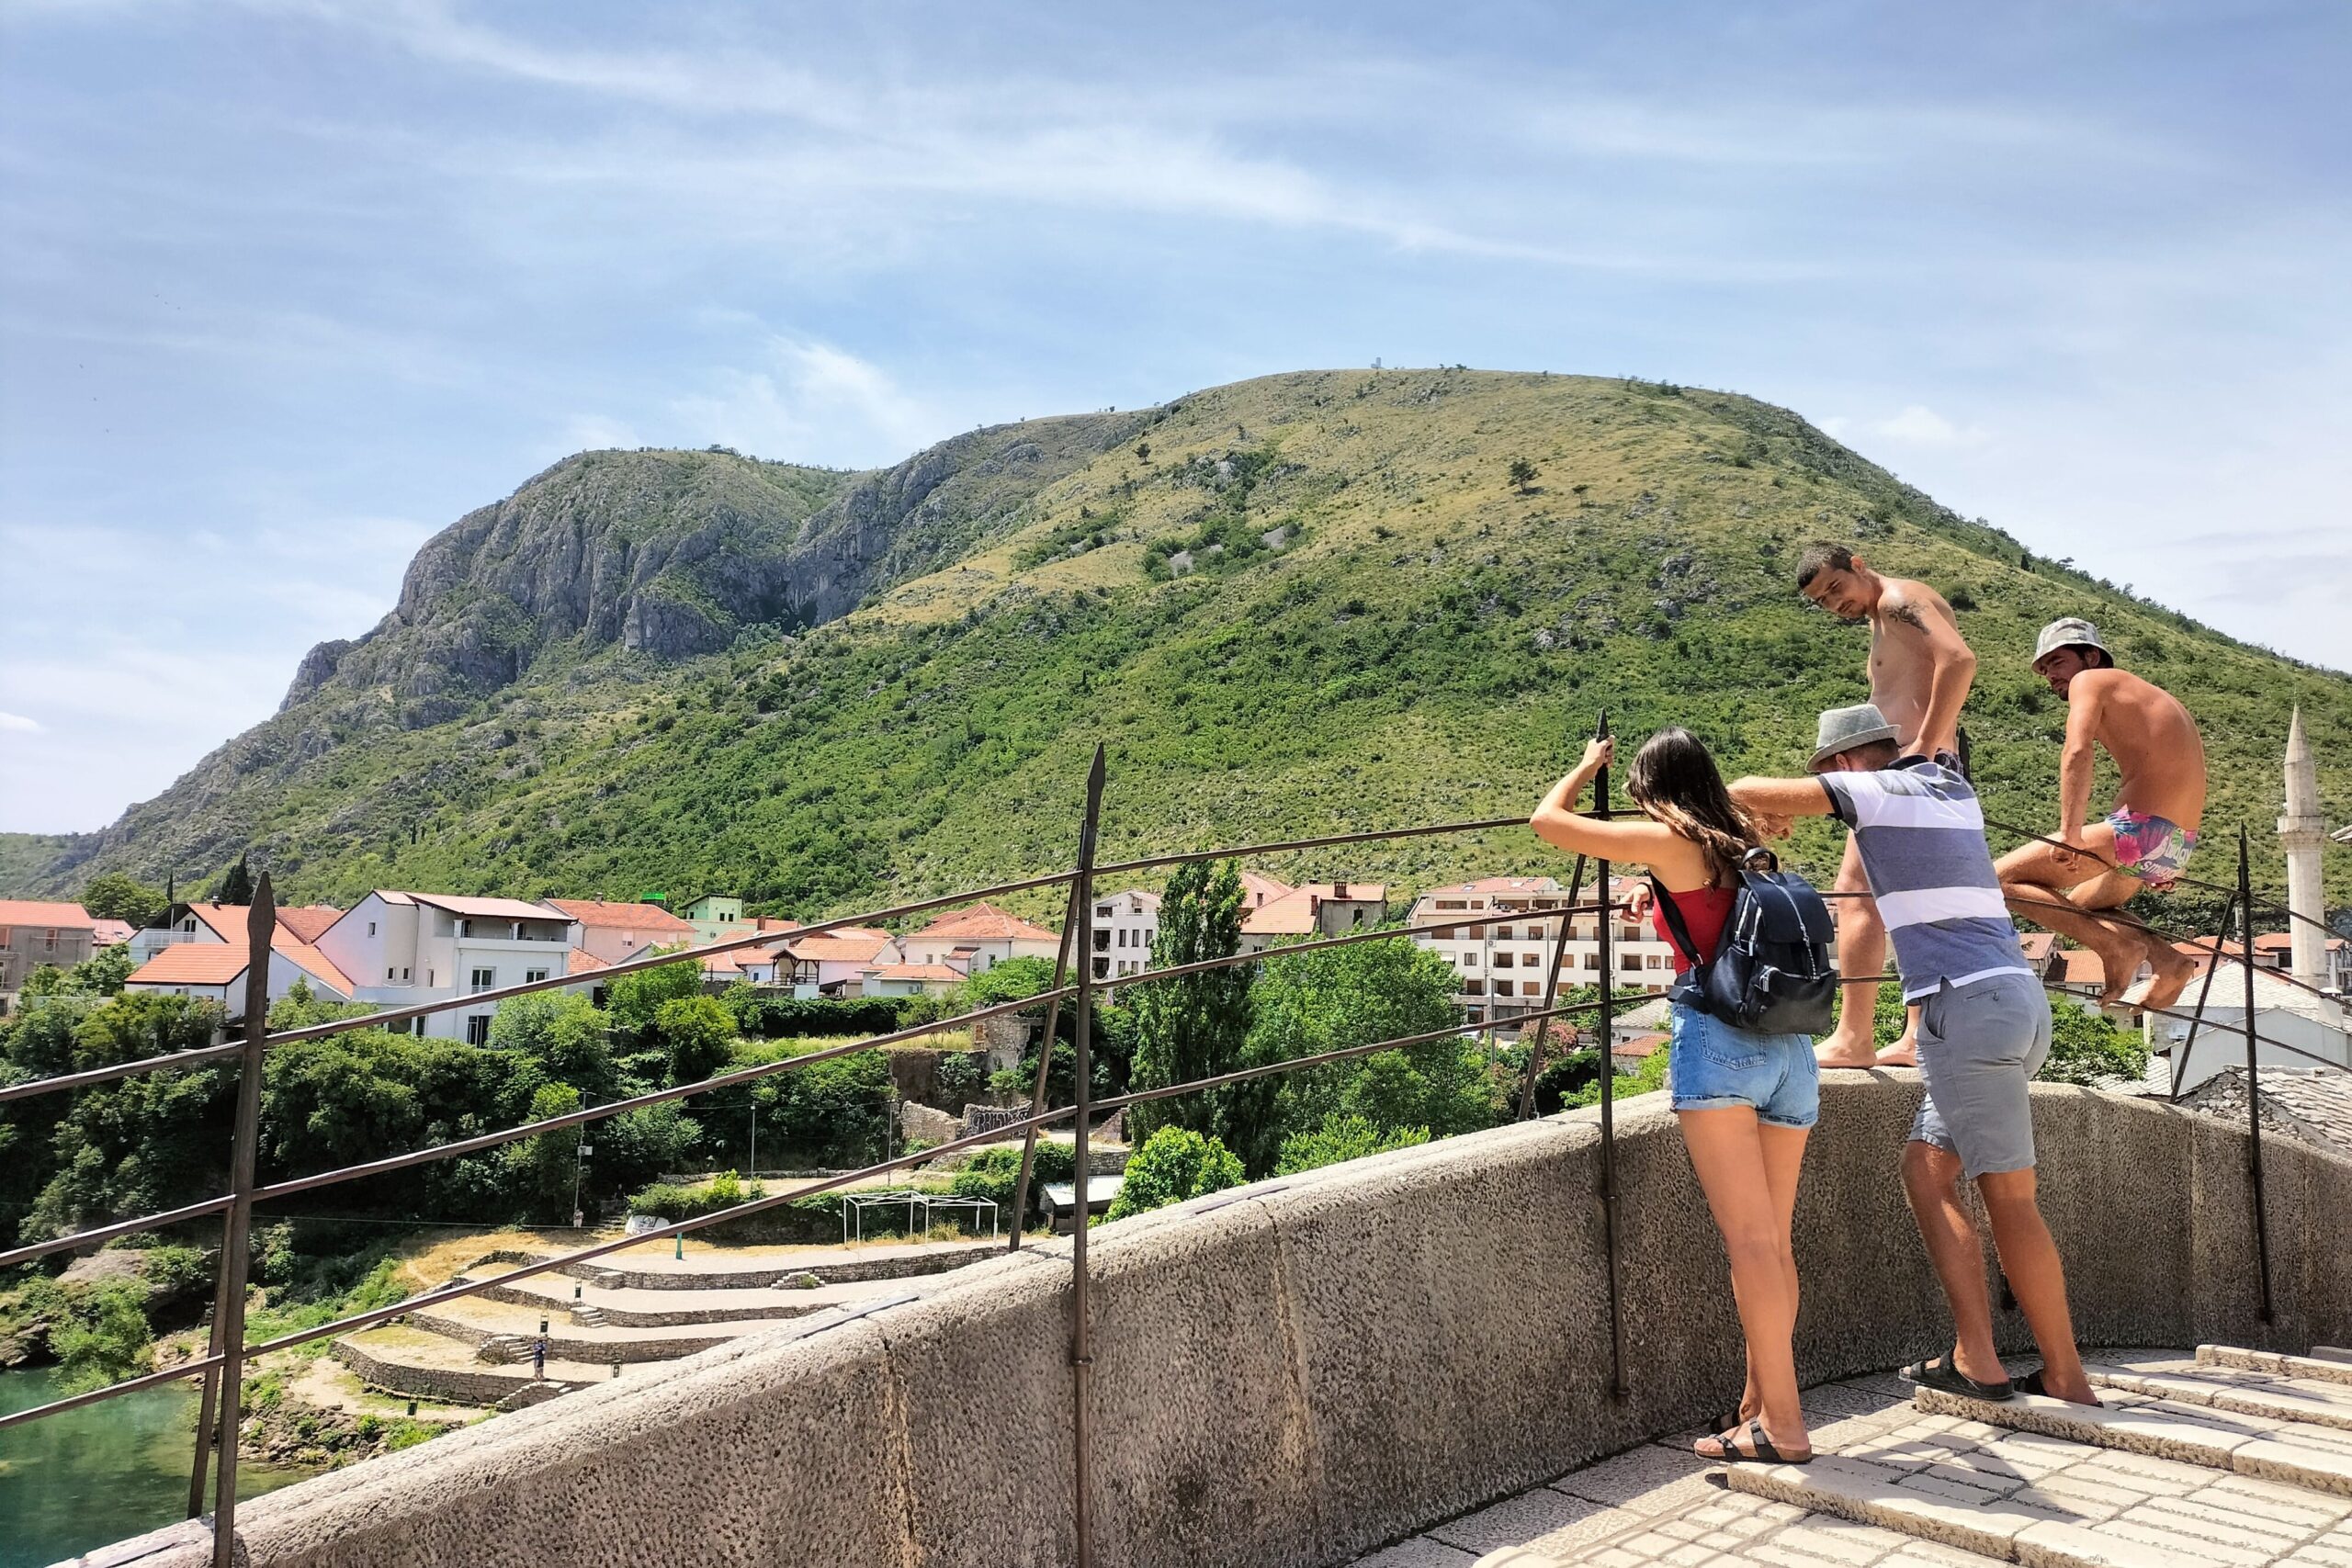 things to do in Mostar - see the bridge jumpers